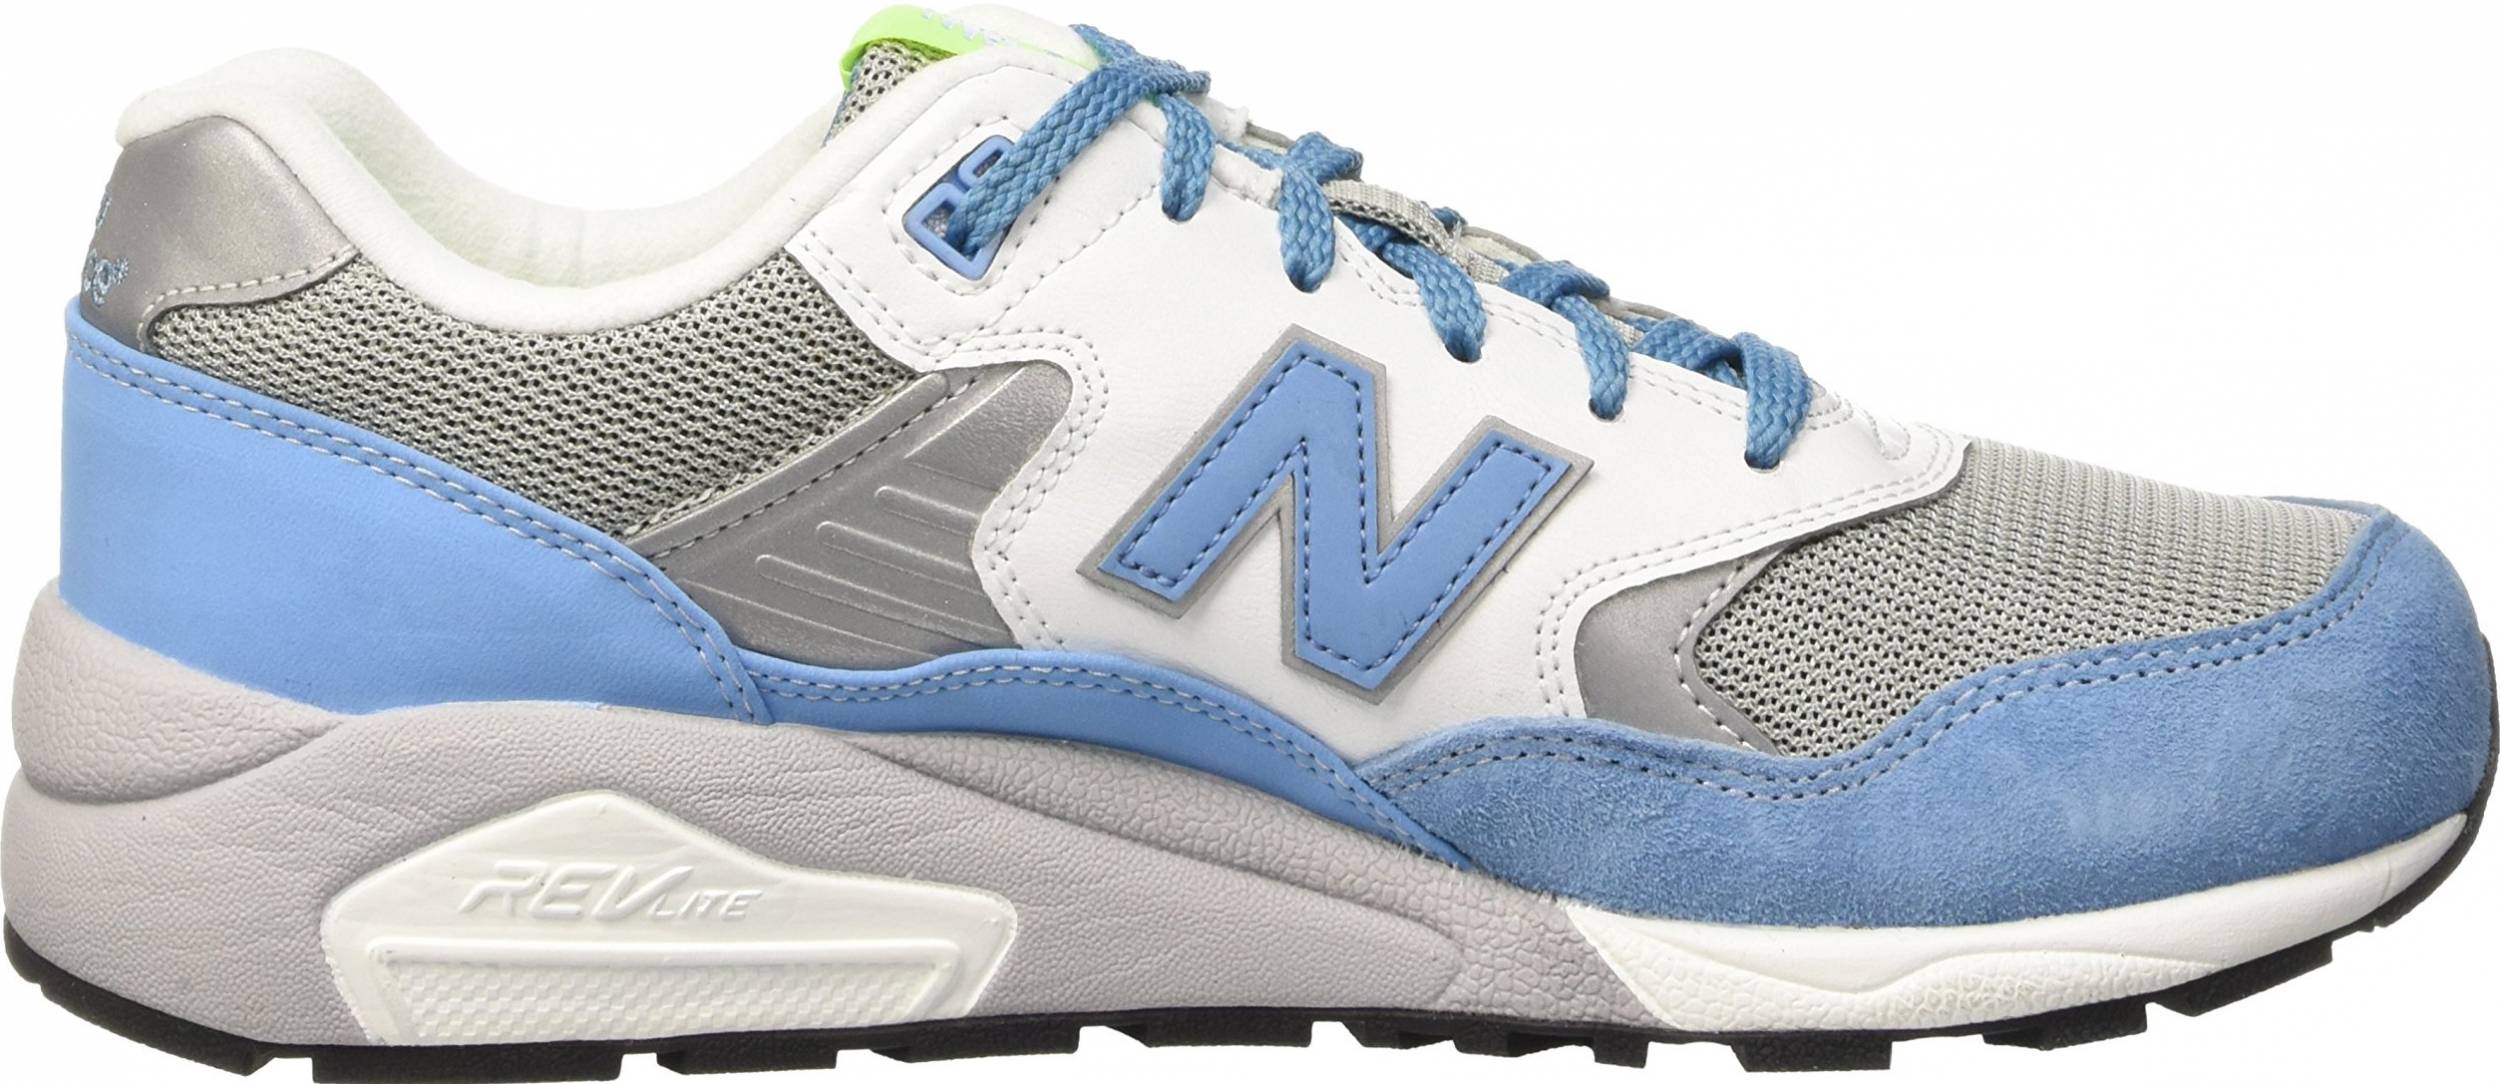 New Balance 580 sneakers (only $120) | RunRepeat